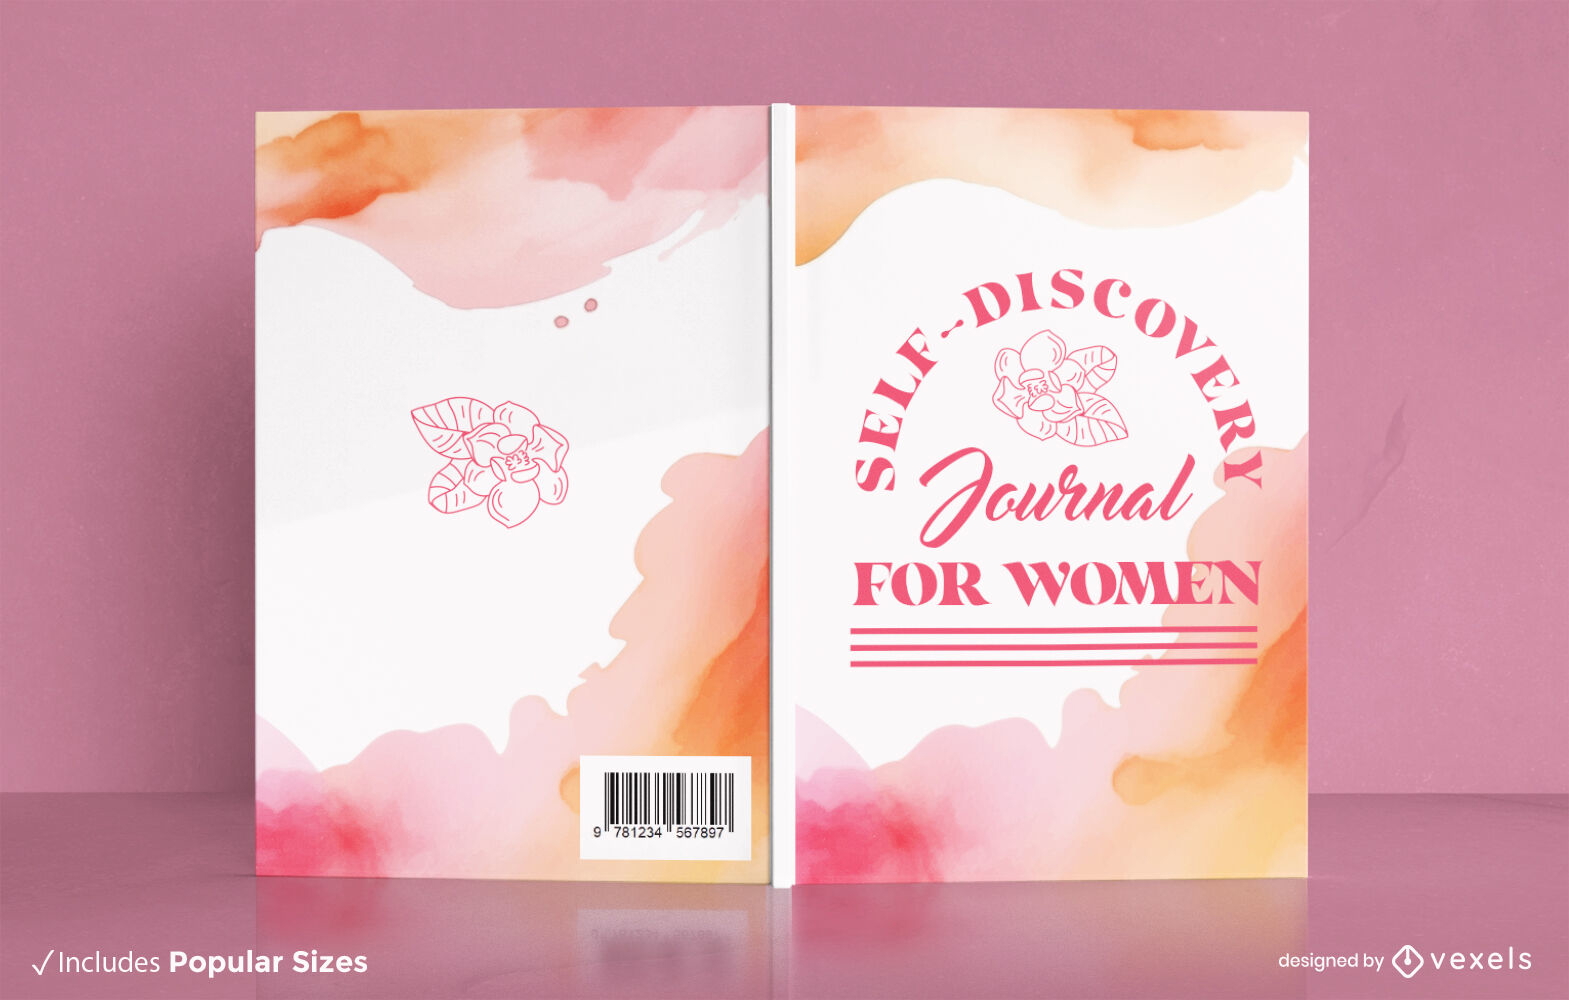 Self discovery journal book cover design KDP